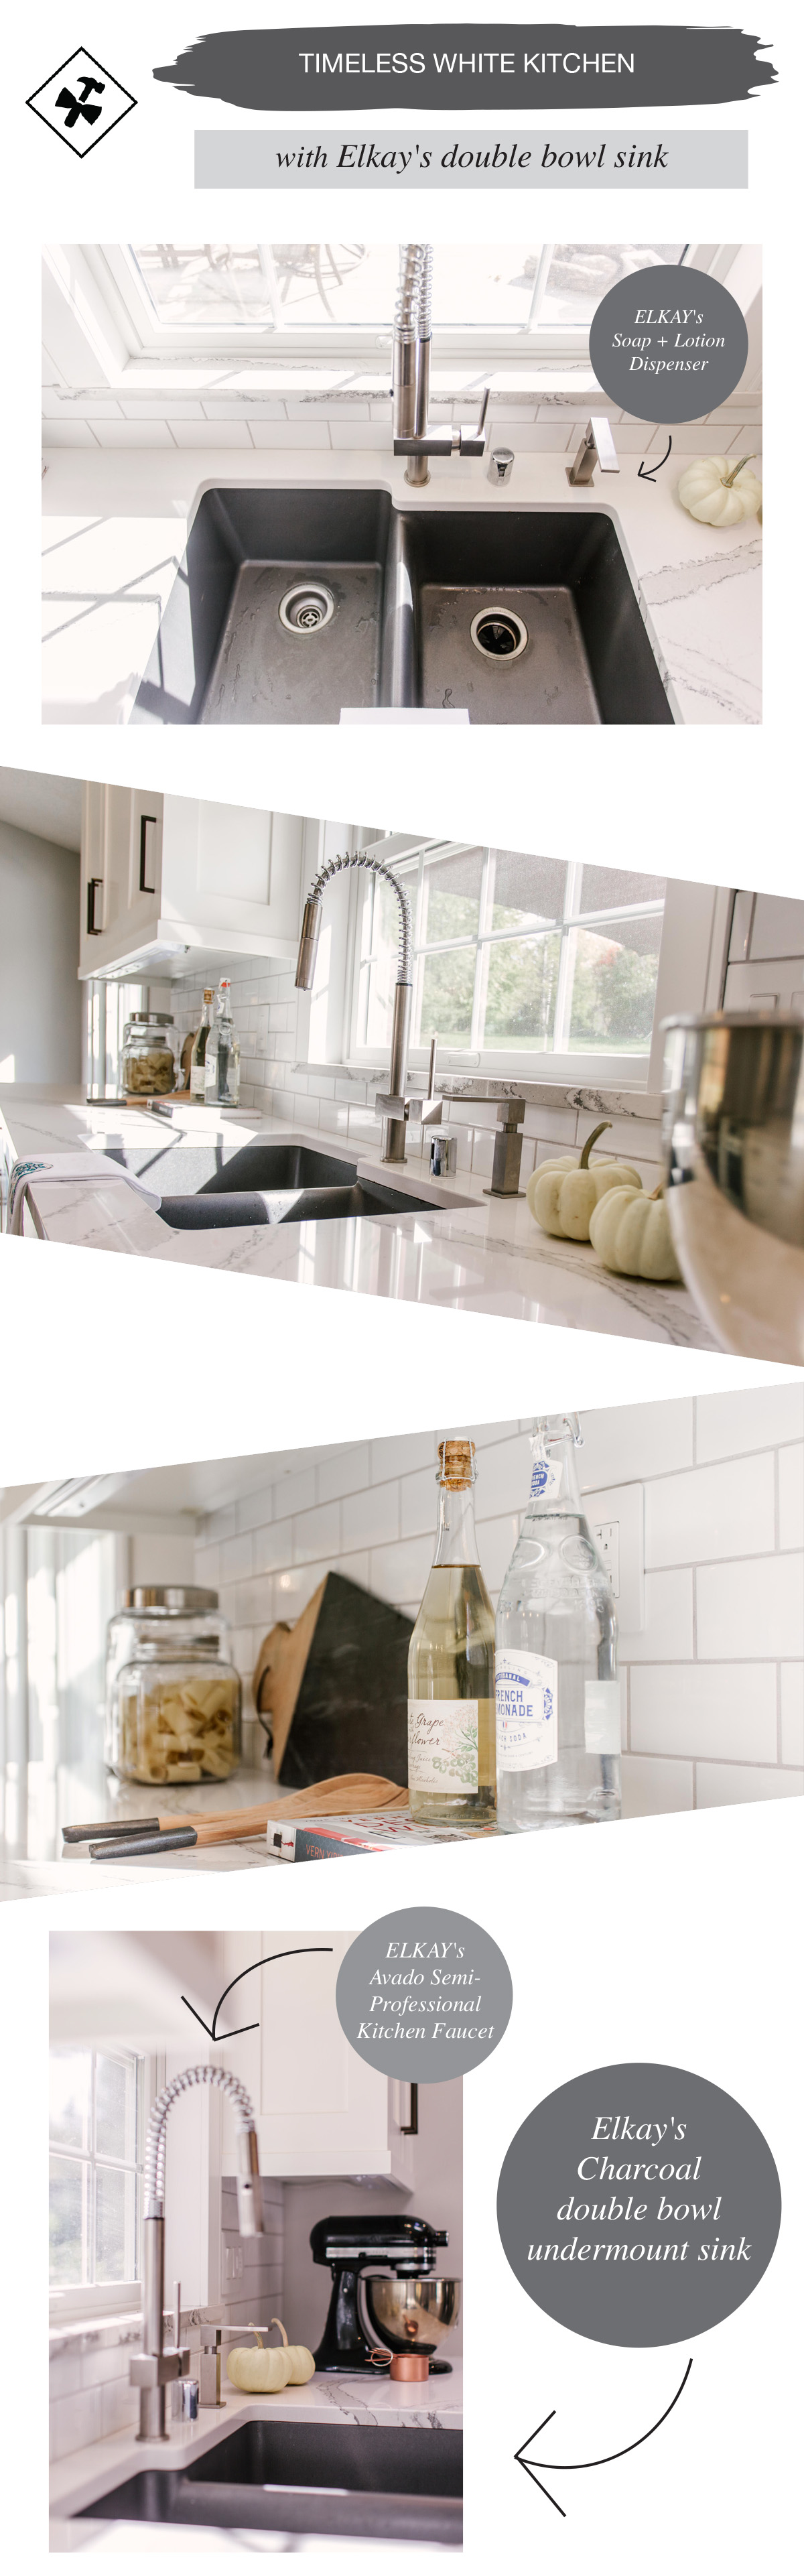 timeless white kitchen with elkay products